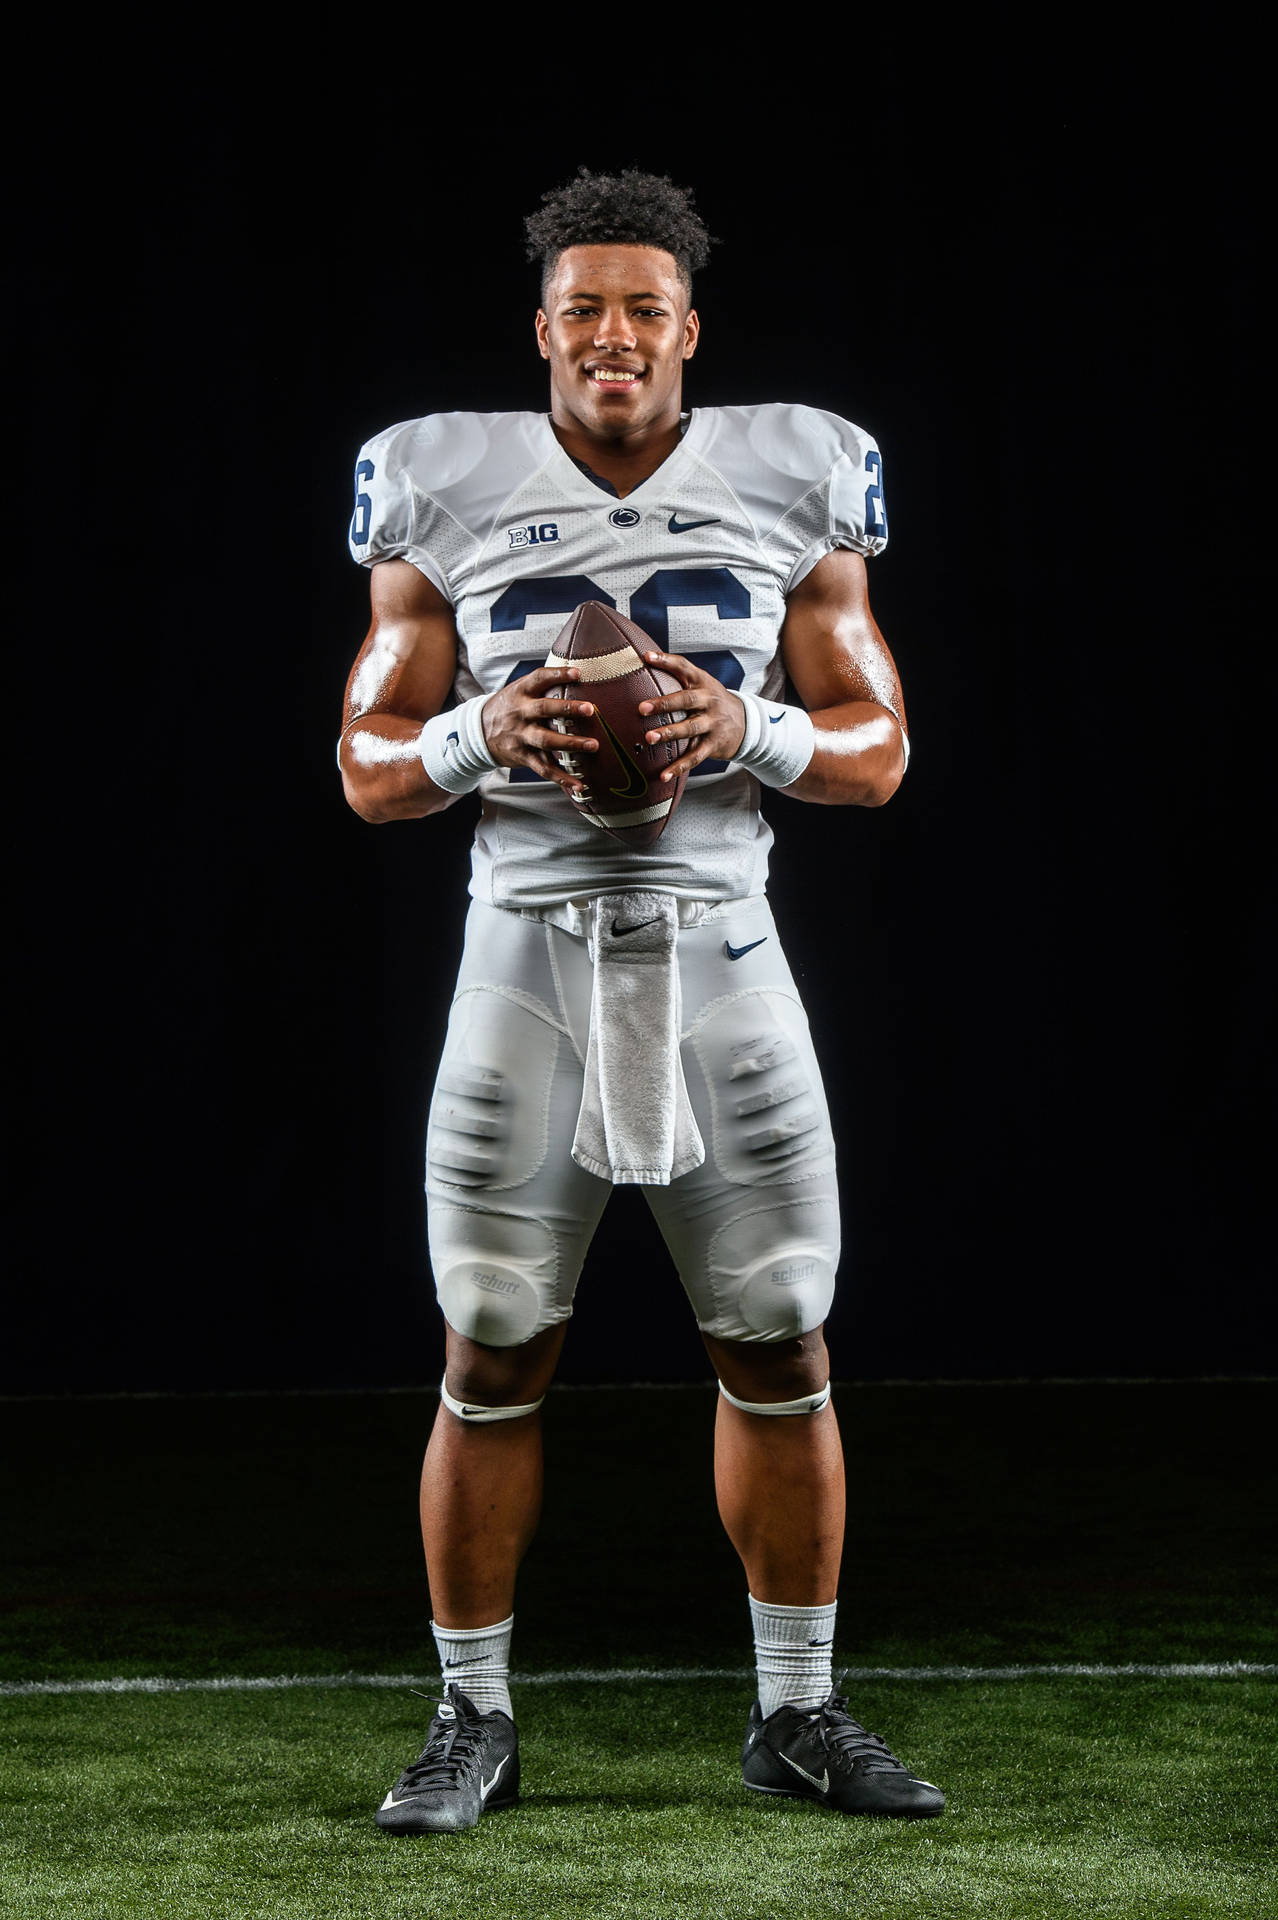 Download Saquon Barkley in action on the field Wallpaper